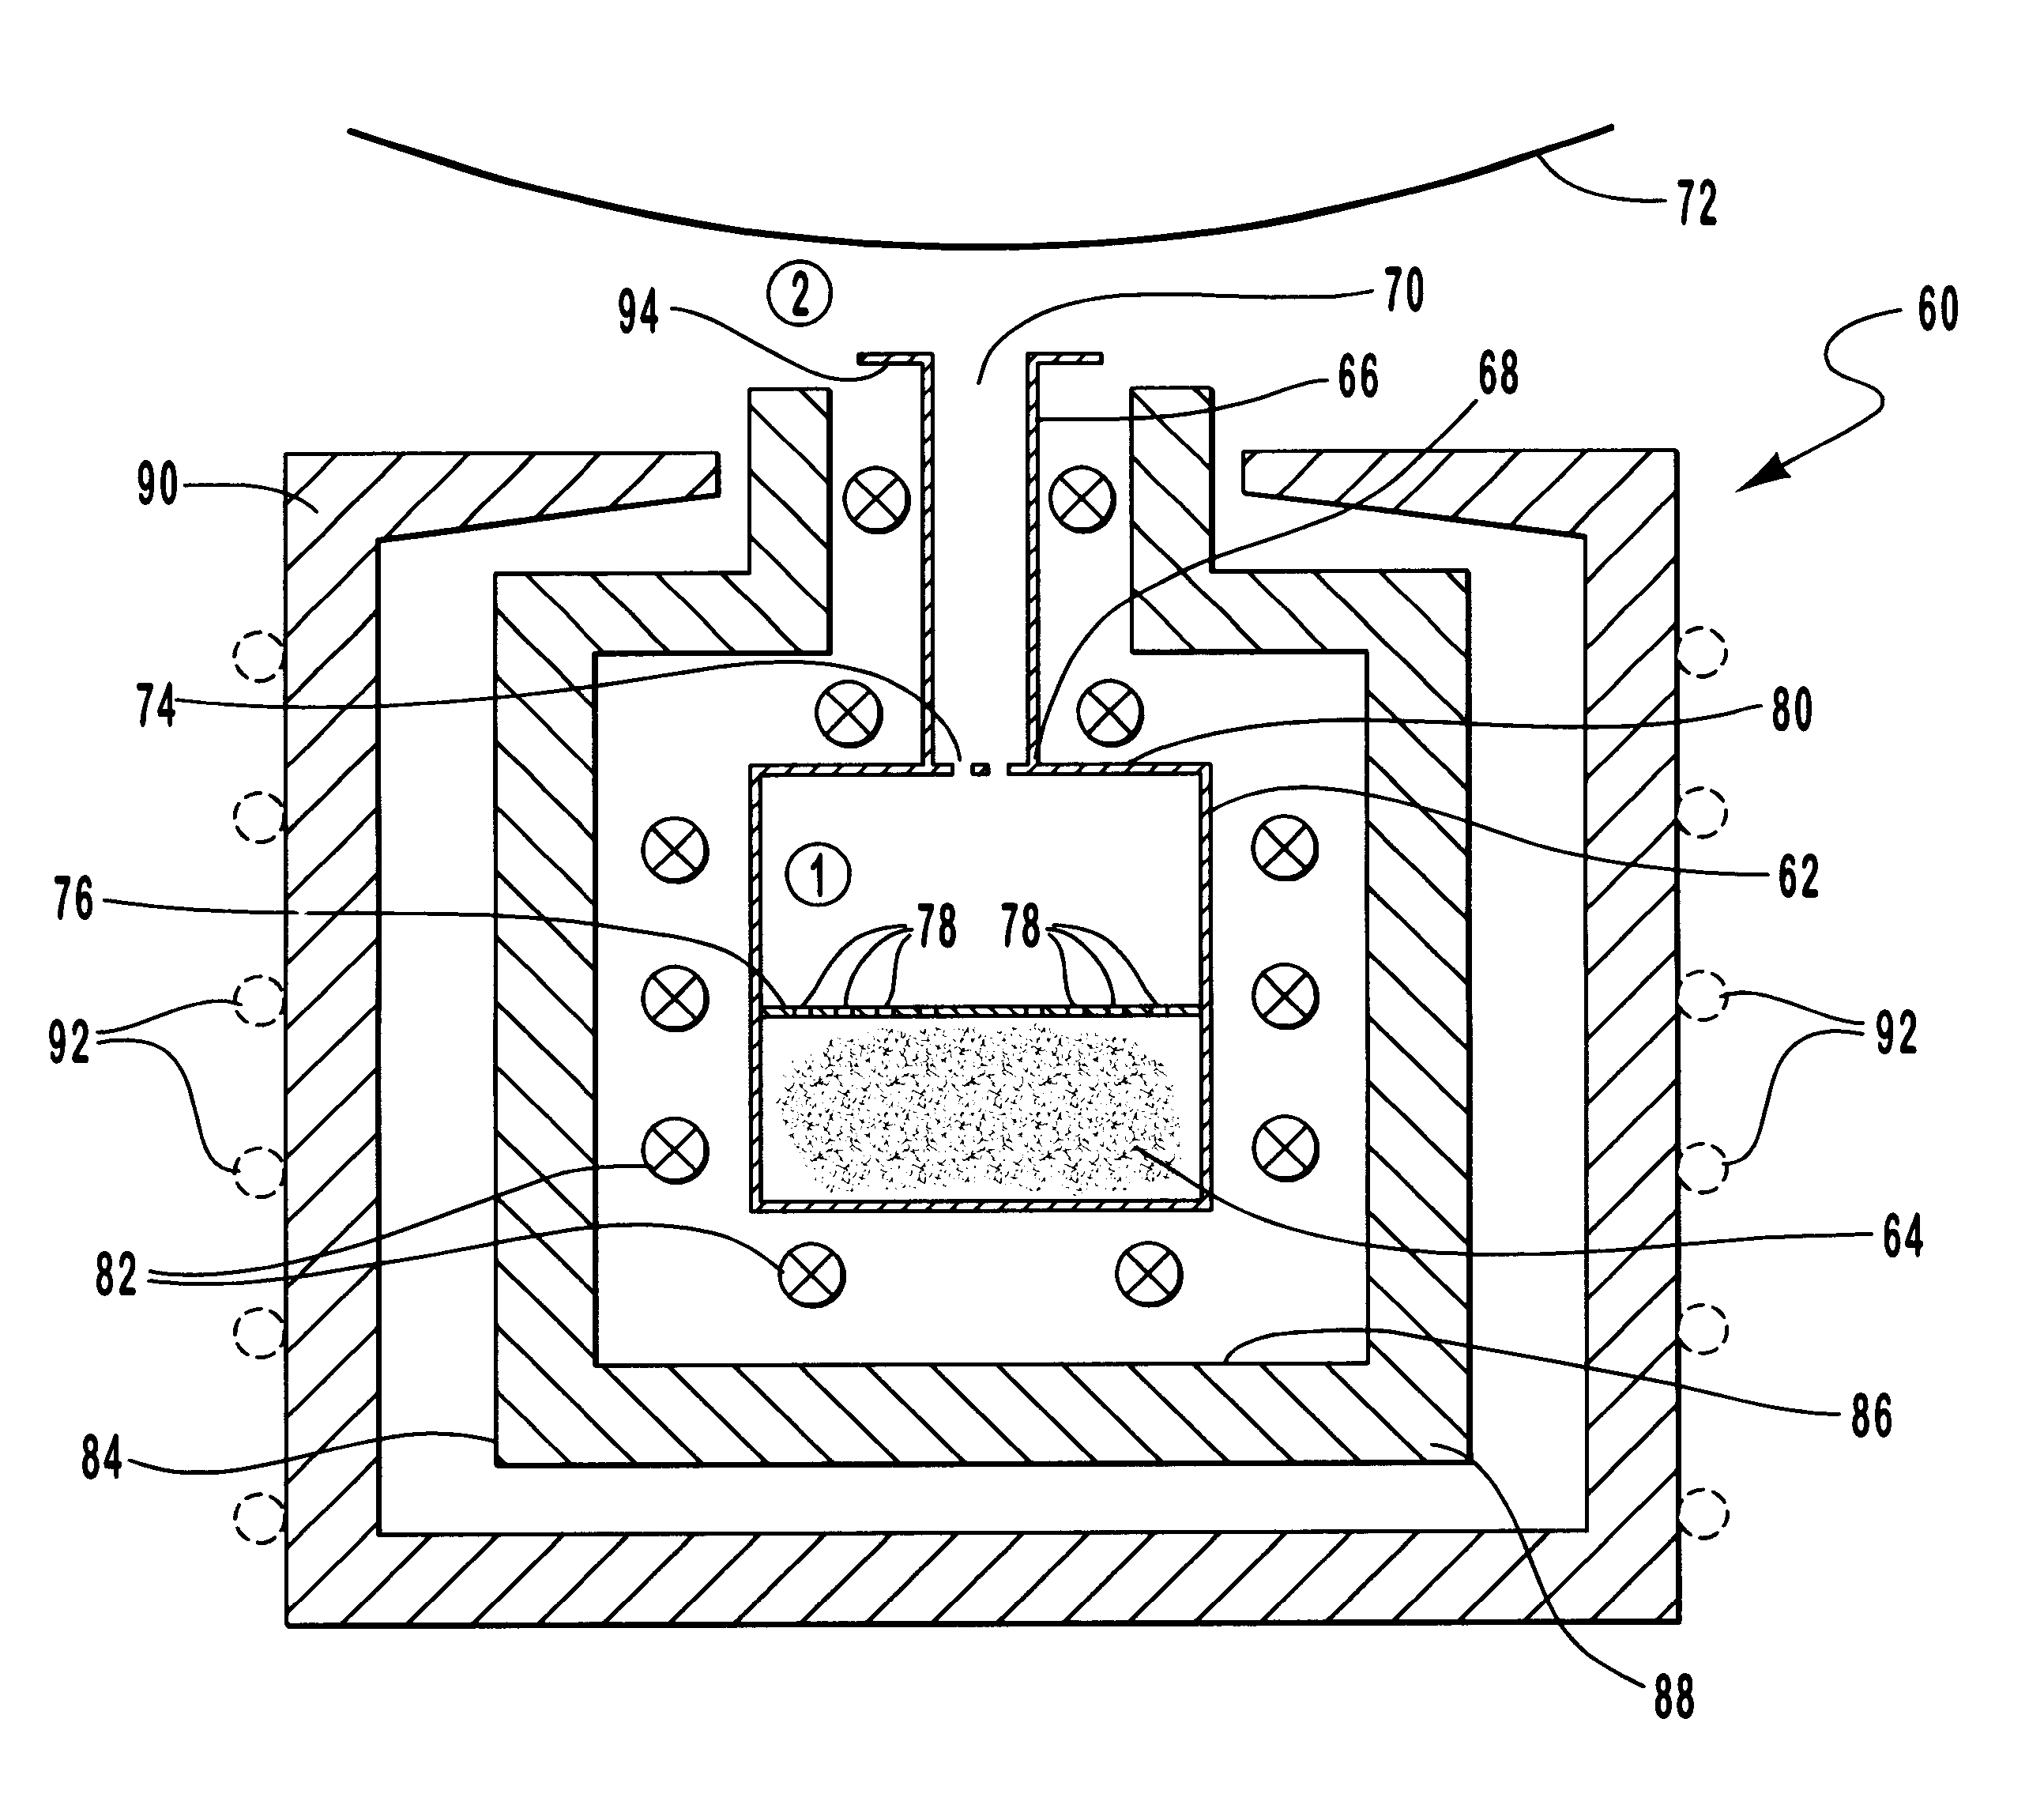 Linear aperture deposition apparatus and coating process